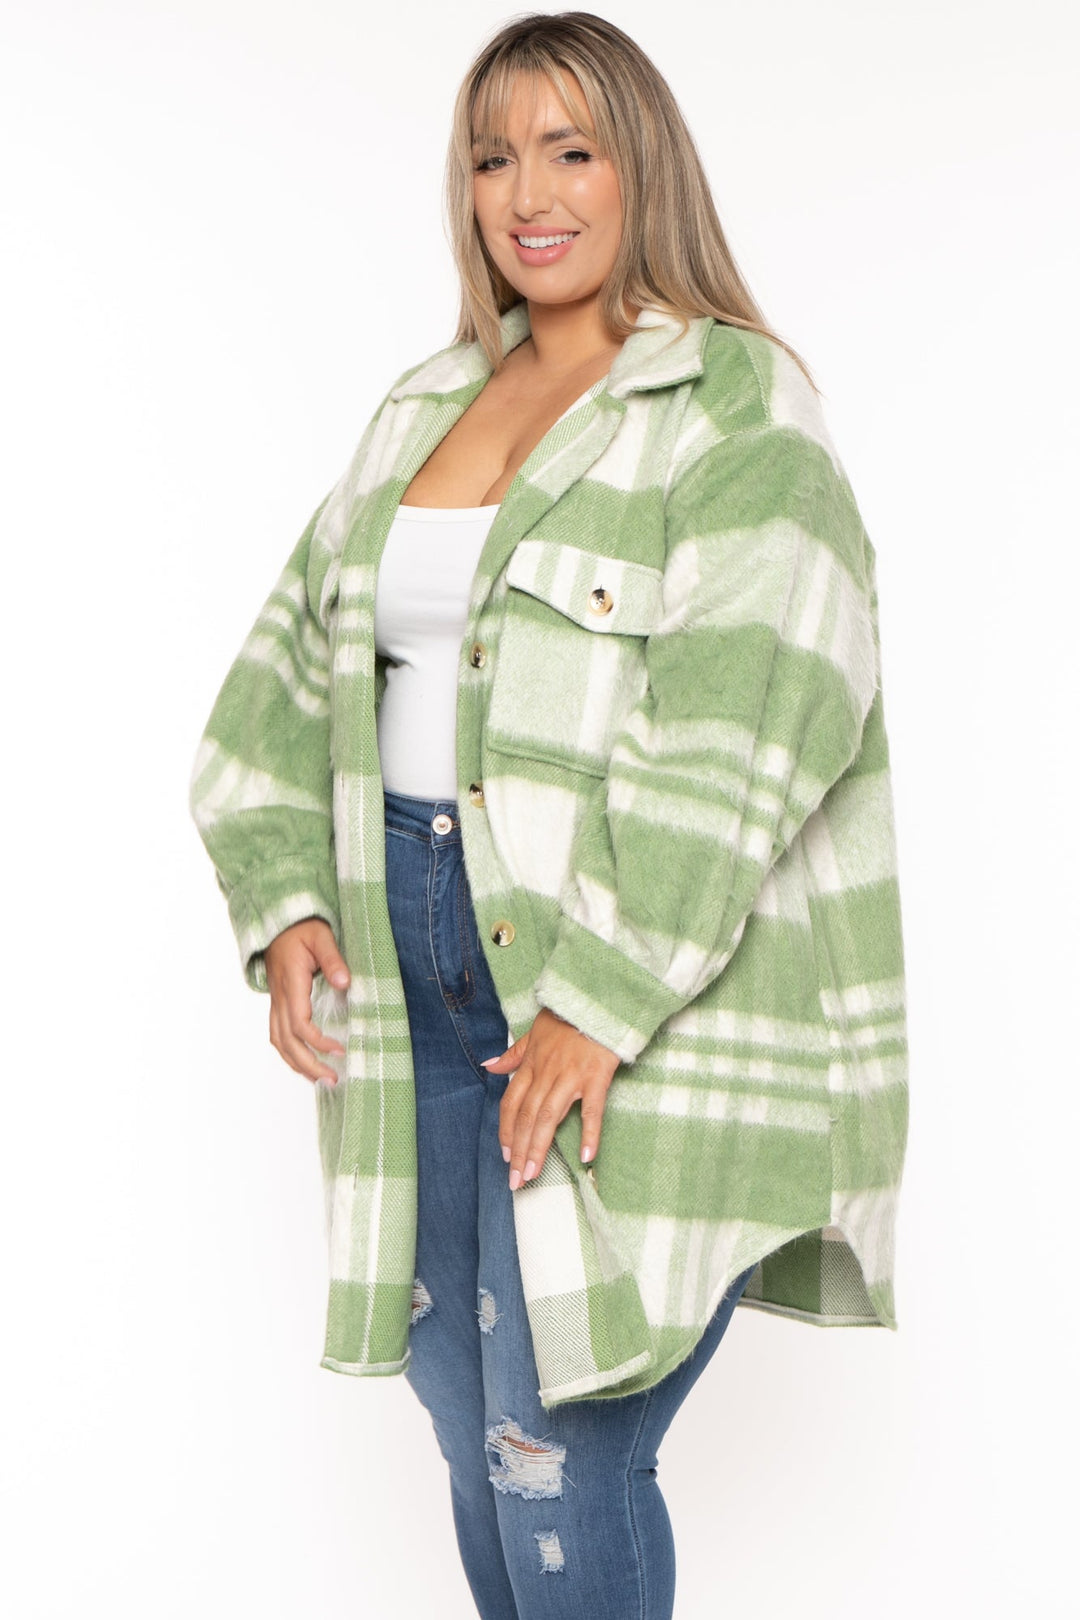 GEE GEE Jackets And Outerwear Plus Size Plaid Long  Jacket- Green